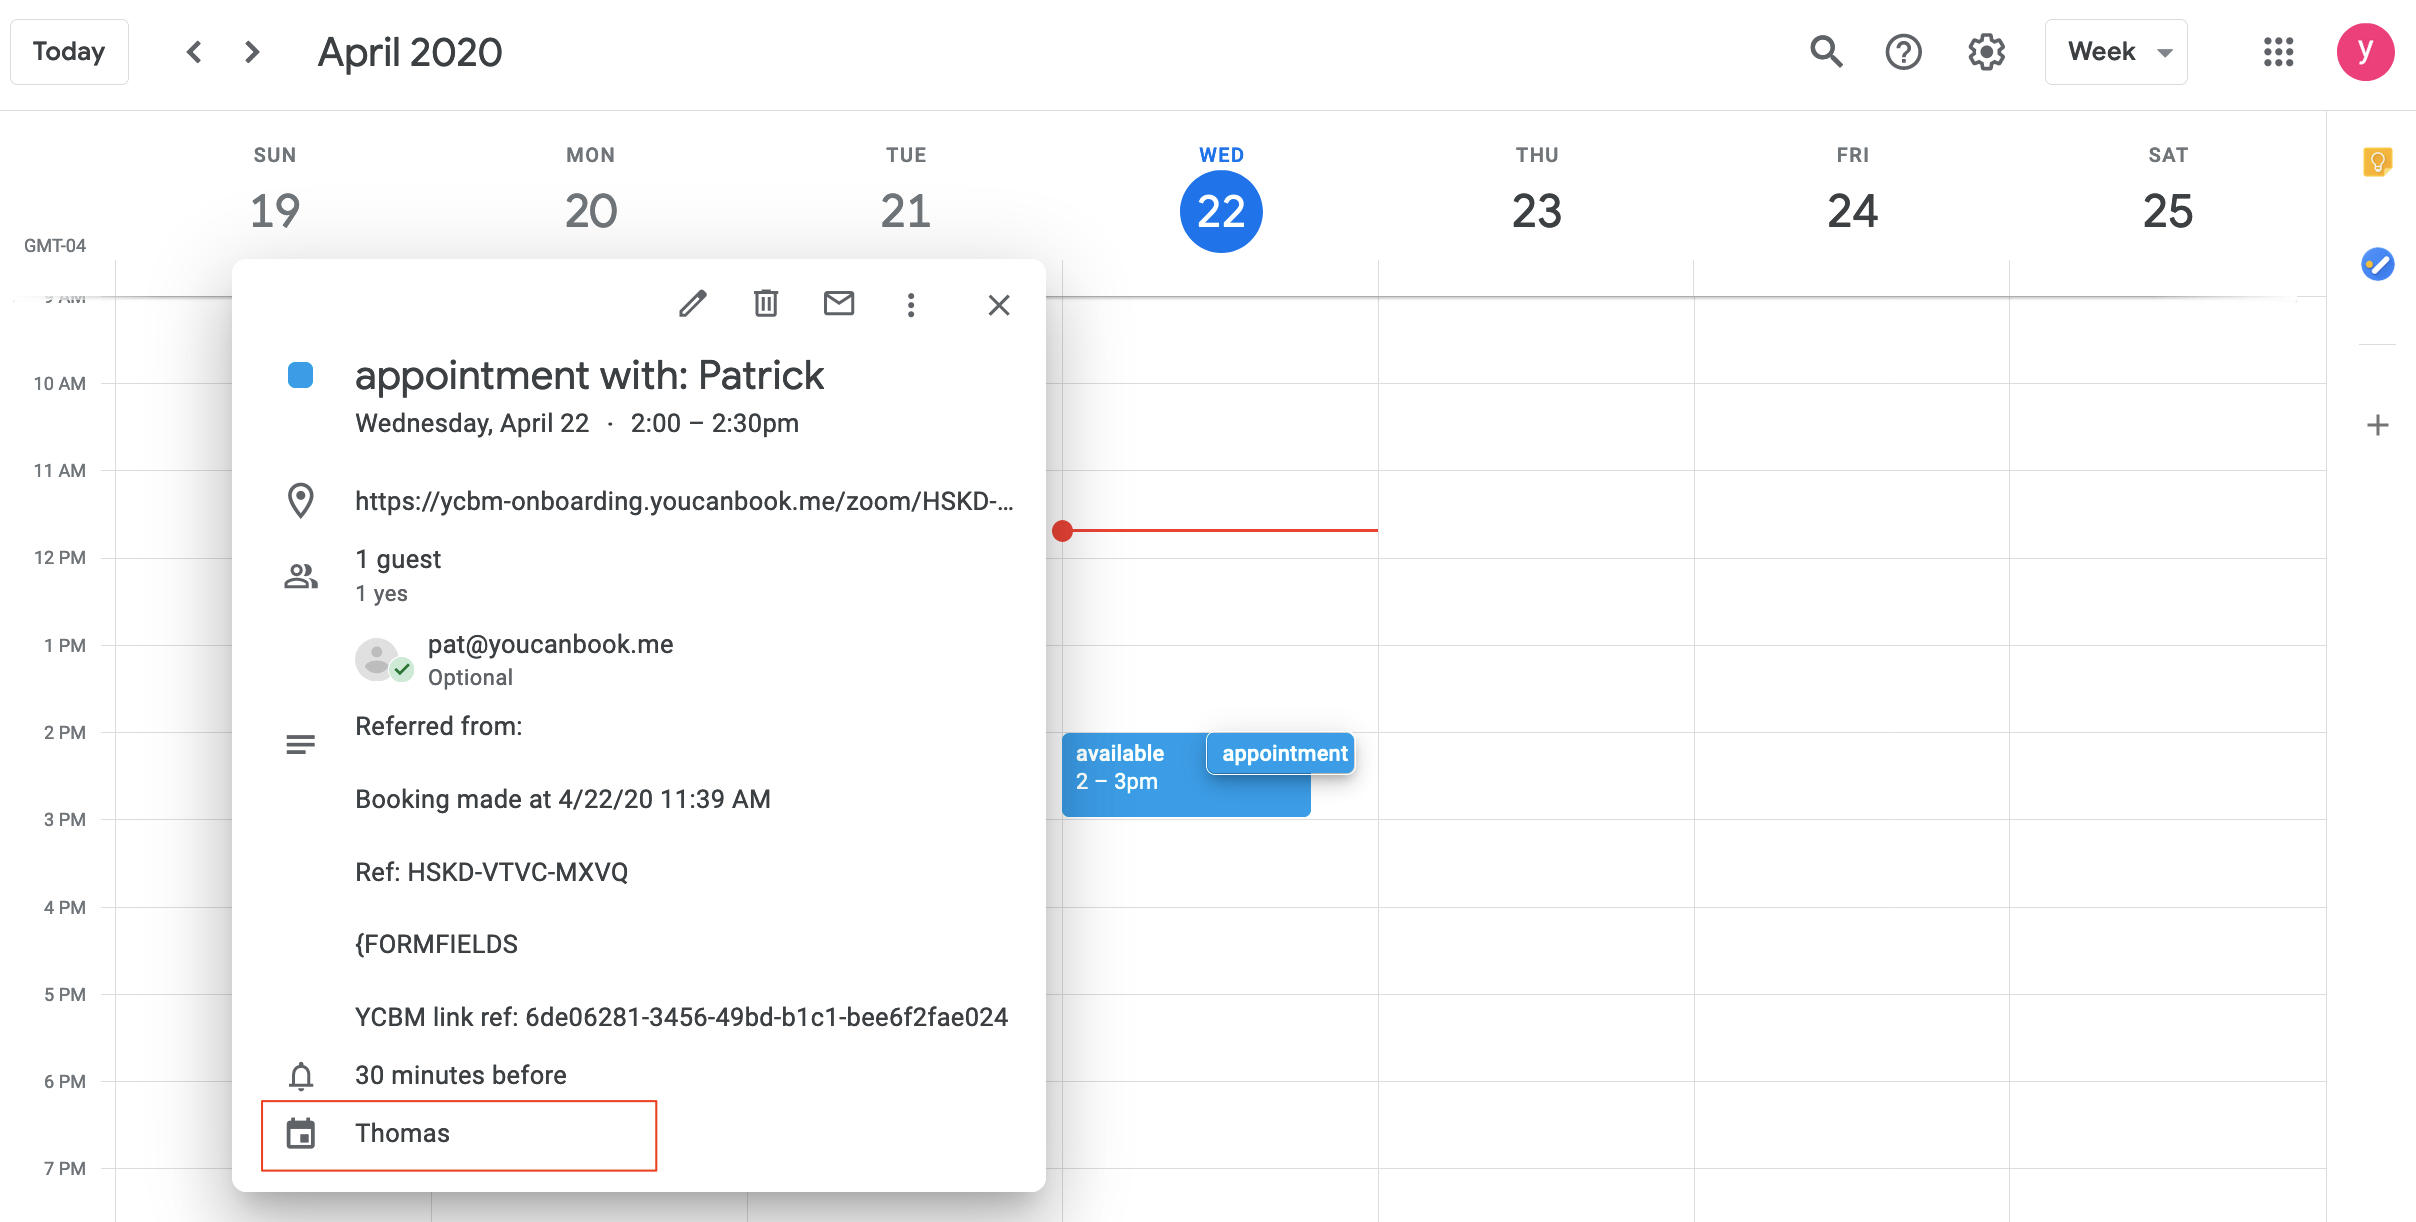 How Do I Change The Organizer On My Calendar Invitation with regard to Calendar Invitation Your Response To The Invitation Cannot Be Sent